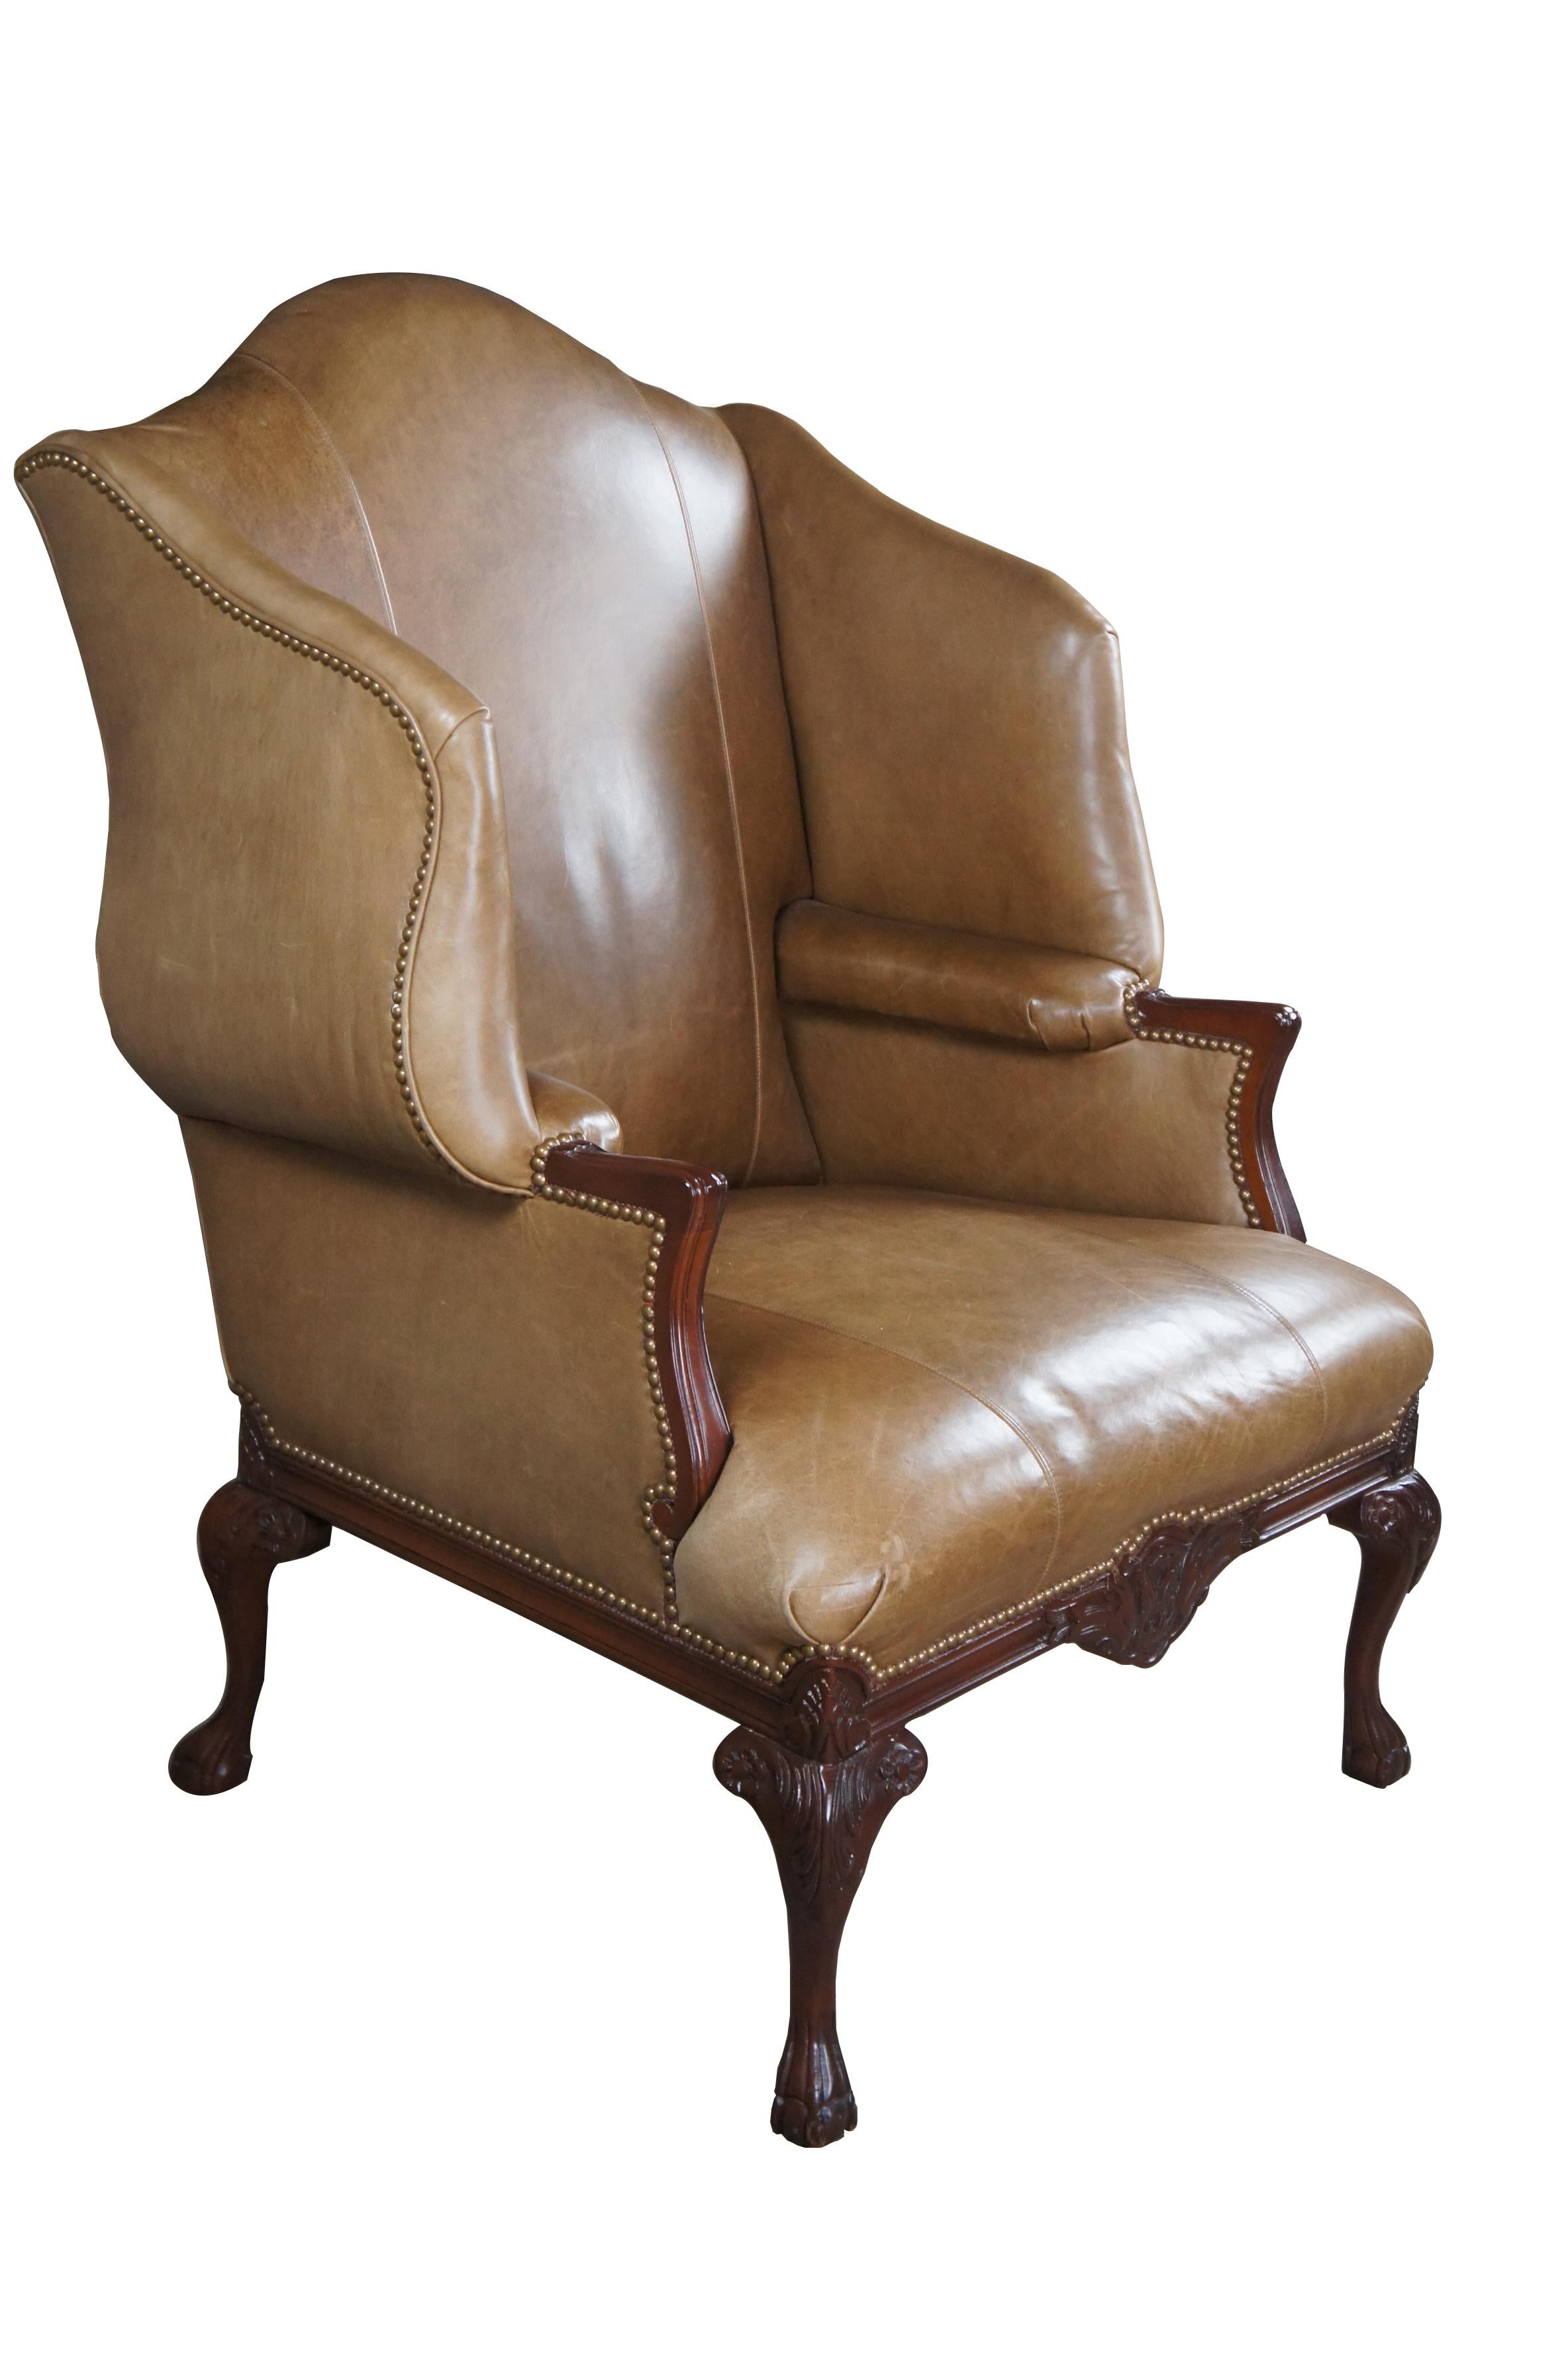 Vintage Baker Furniture oversized wingback library, club or lounge chair.  Features English Chippendale styling with leather upholstery, nailhead trim and mahogany frame. The chair supported by ball and claw feet with acanthus carvings at the